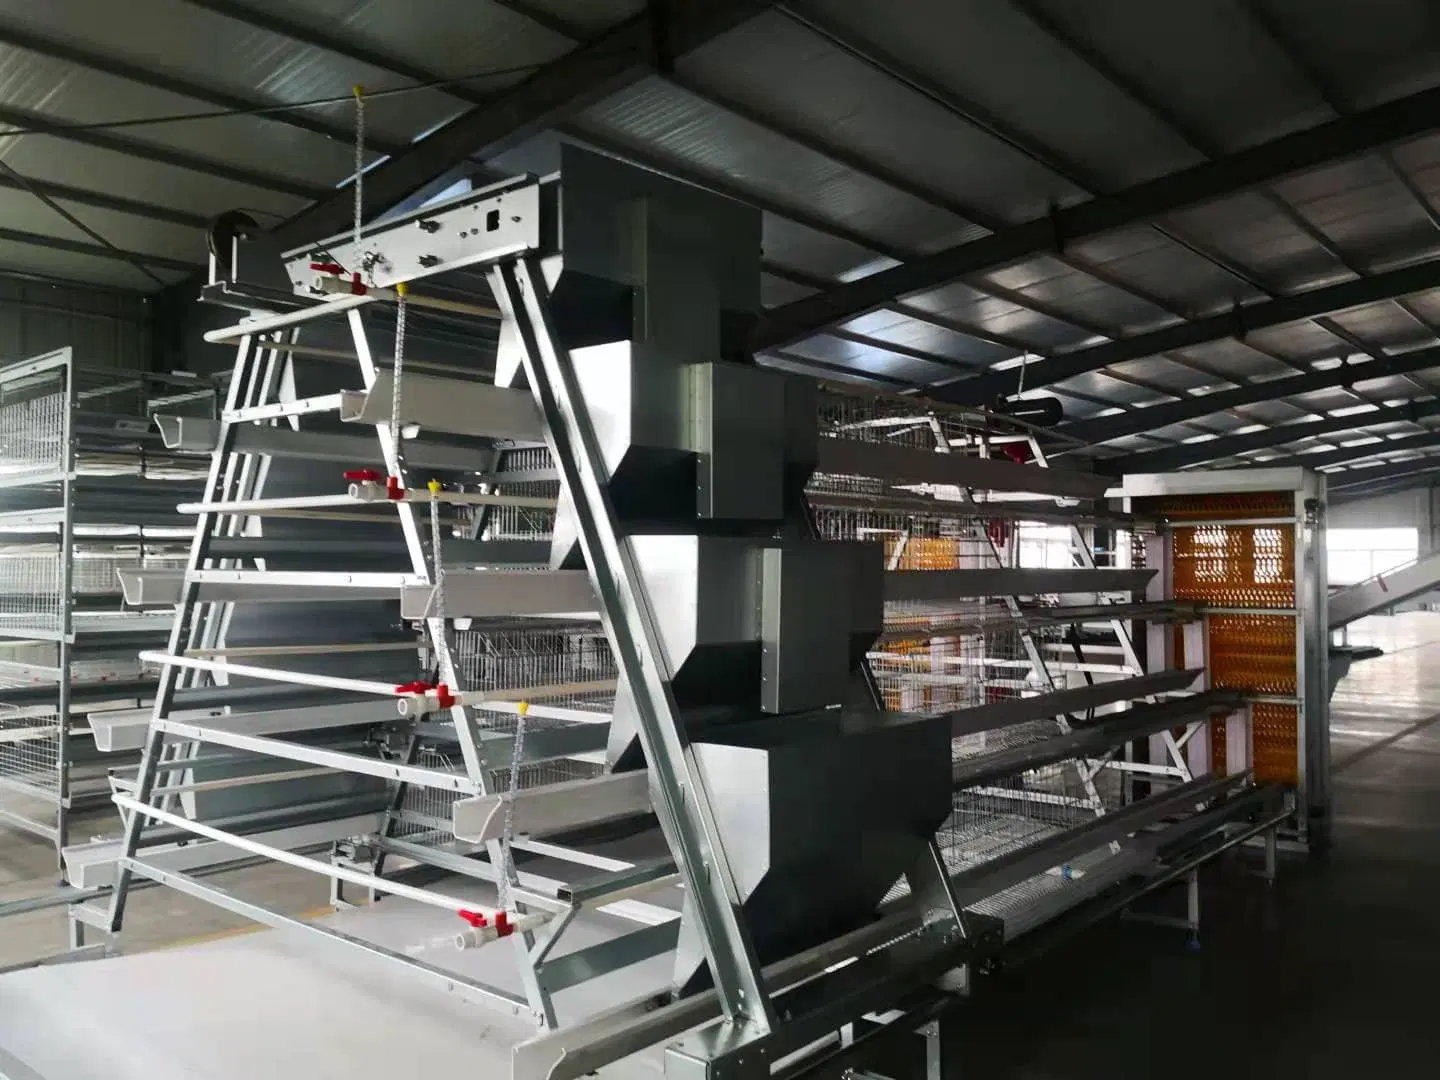 Hot Sale Good Quality Poultry Farming Equipment Layer Cage for Cameroon